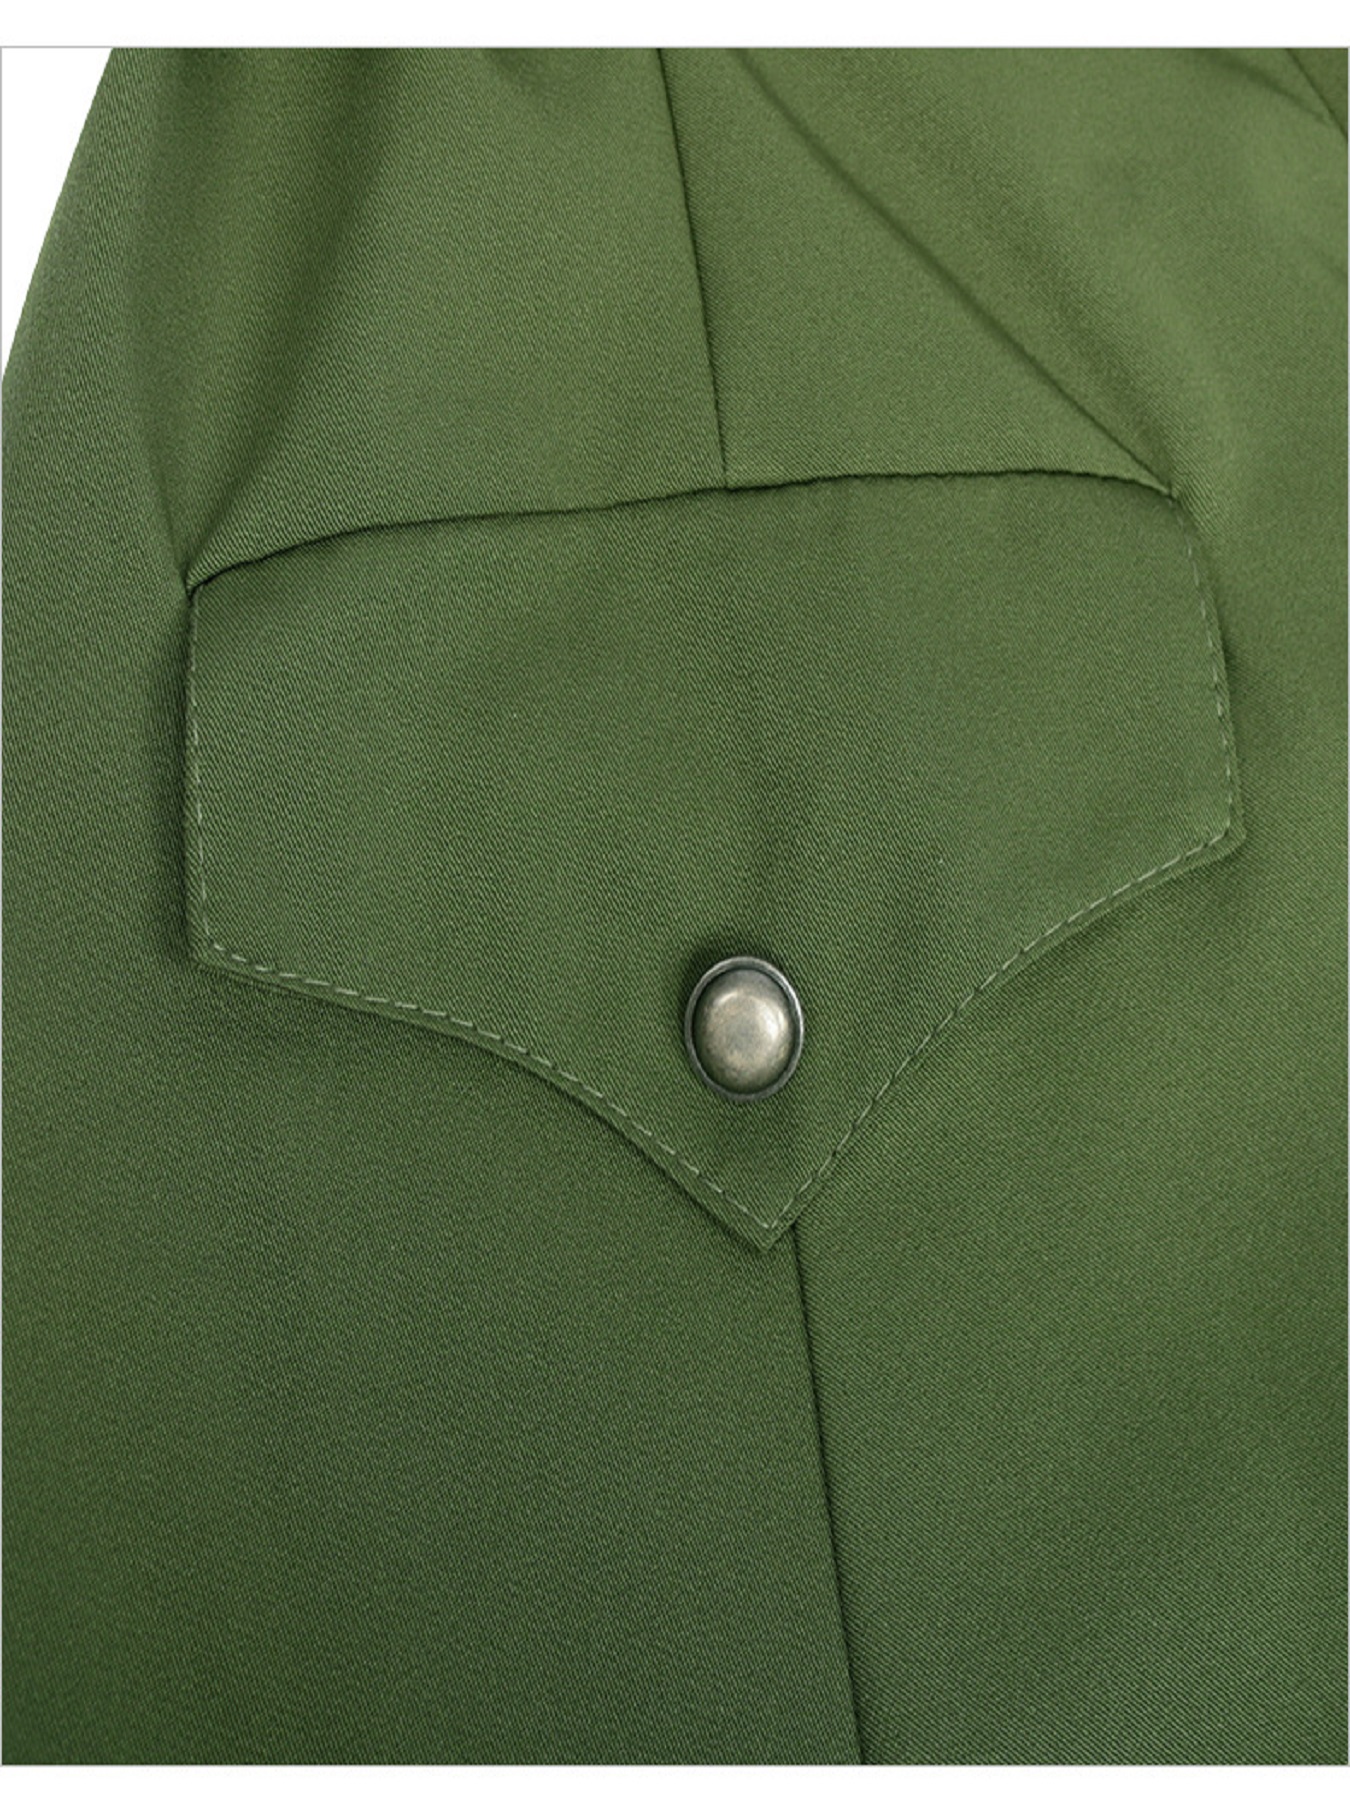 Solid Double Breasted Pea Coat, Belted Buckle Spring Mid-long